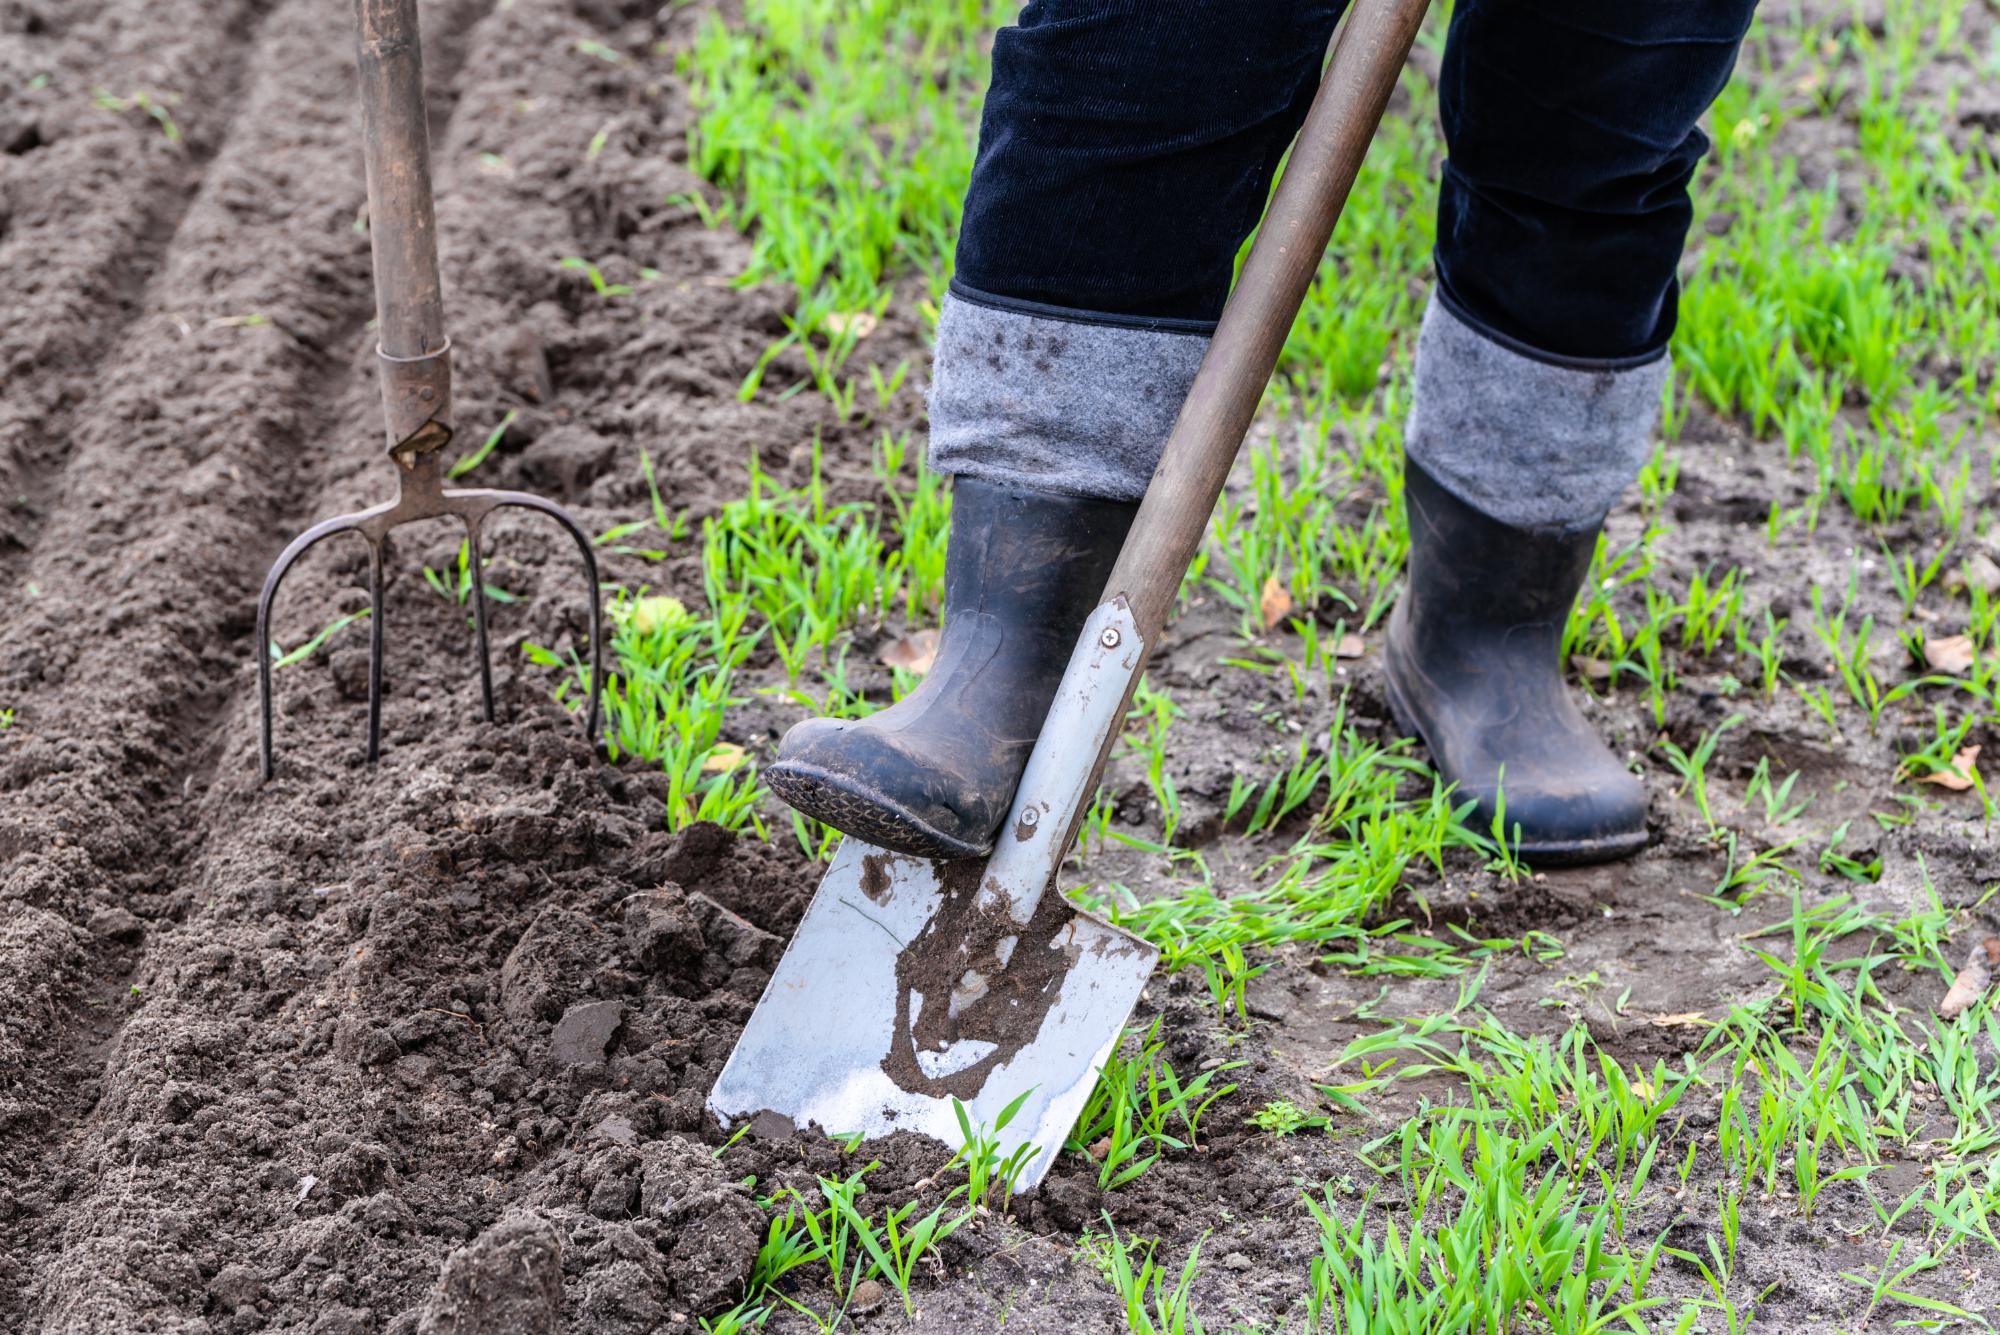 Farmer in rubber boots digging in the garden with a shovel. Preparing soil for planting in spring. Gardening.